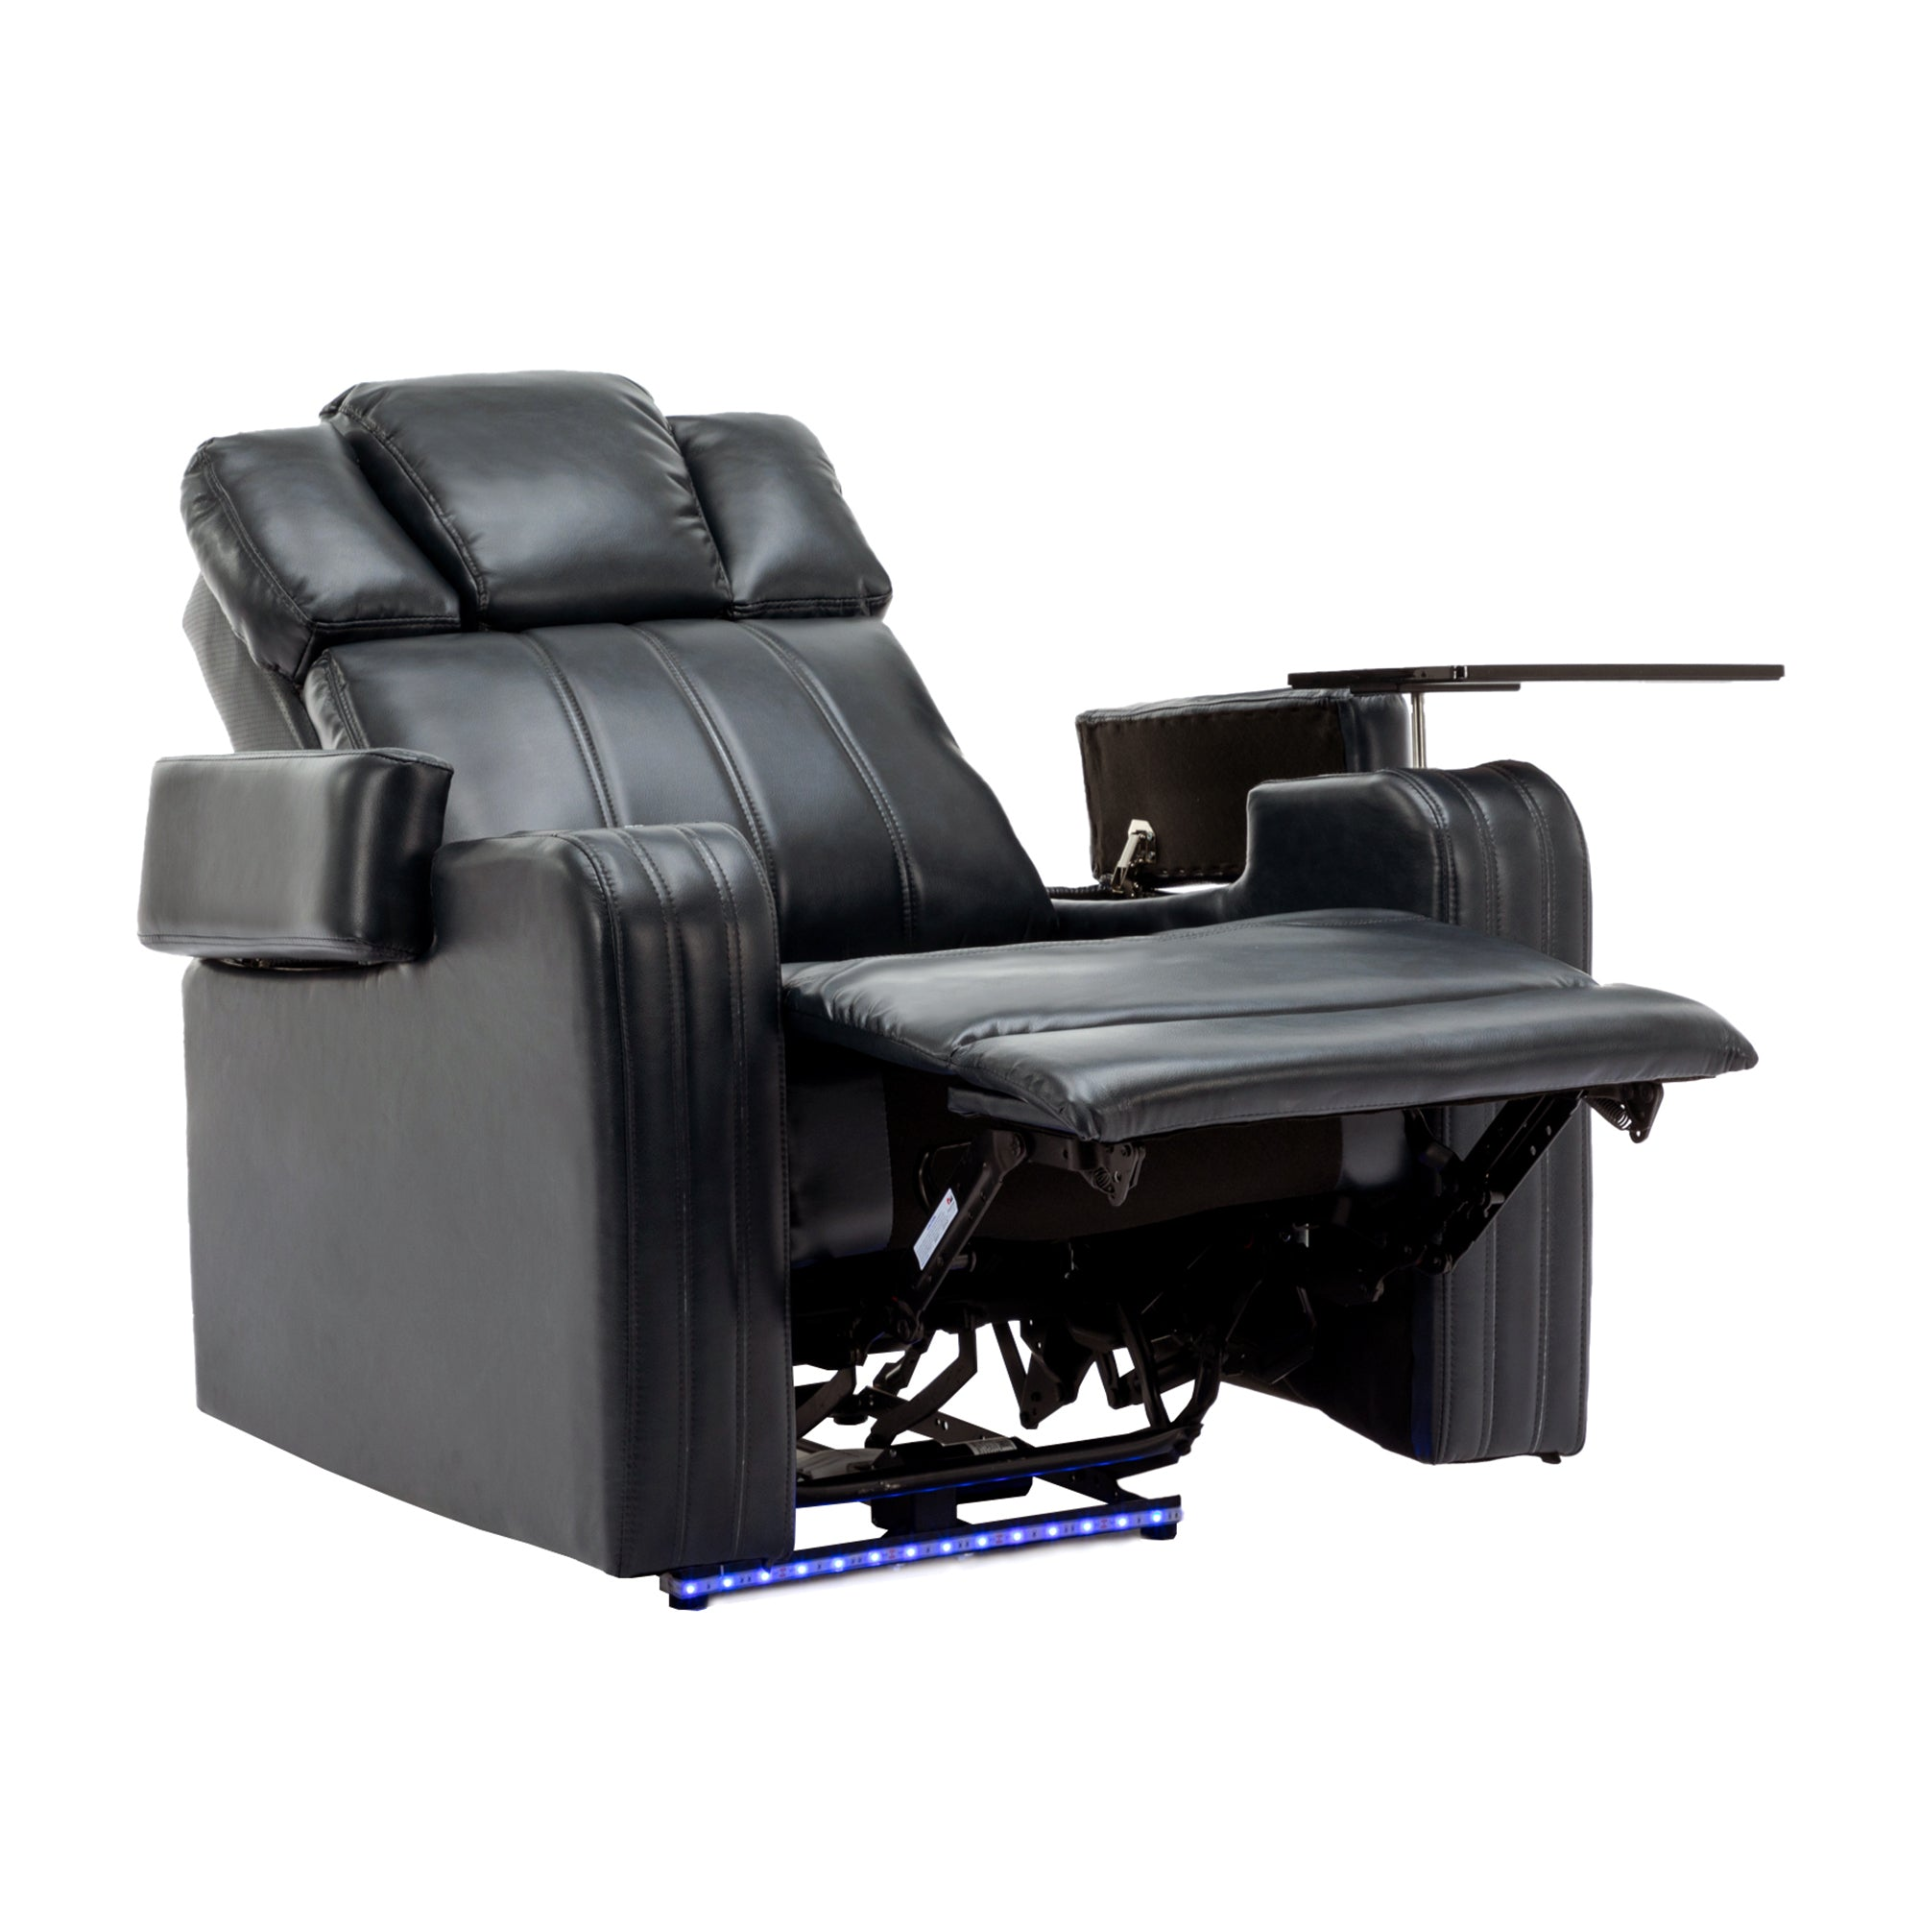 PU Leather Power Recliner Individual Seat Home Theater Recliner with Cooling Cup Holder, Bluetooth Speaker, LED Lights, USB Ports, Tray Table, Arm Storage for Living Room, Black, Goodies N Stuff